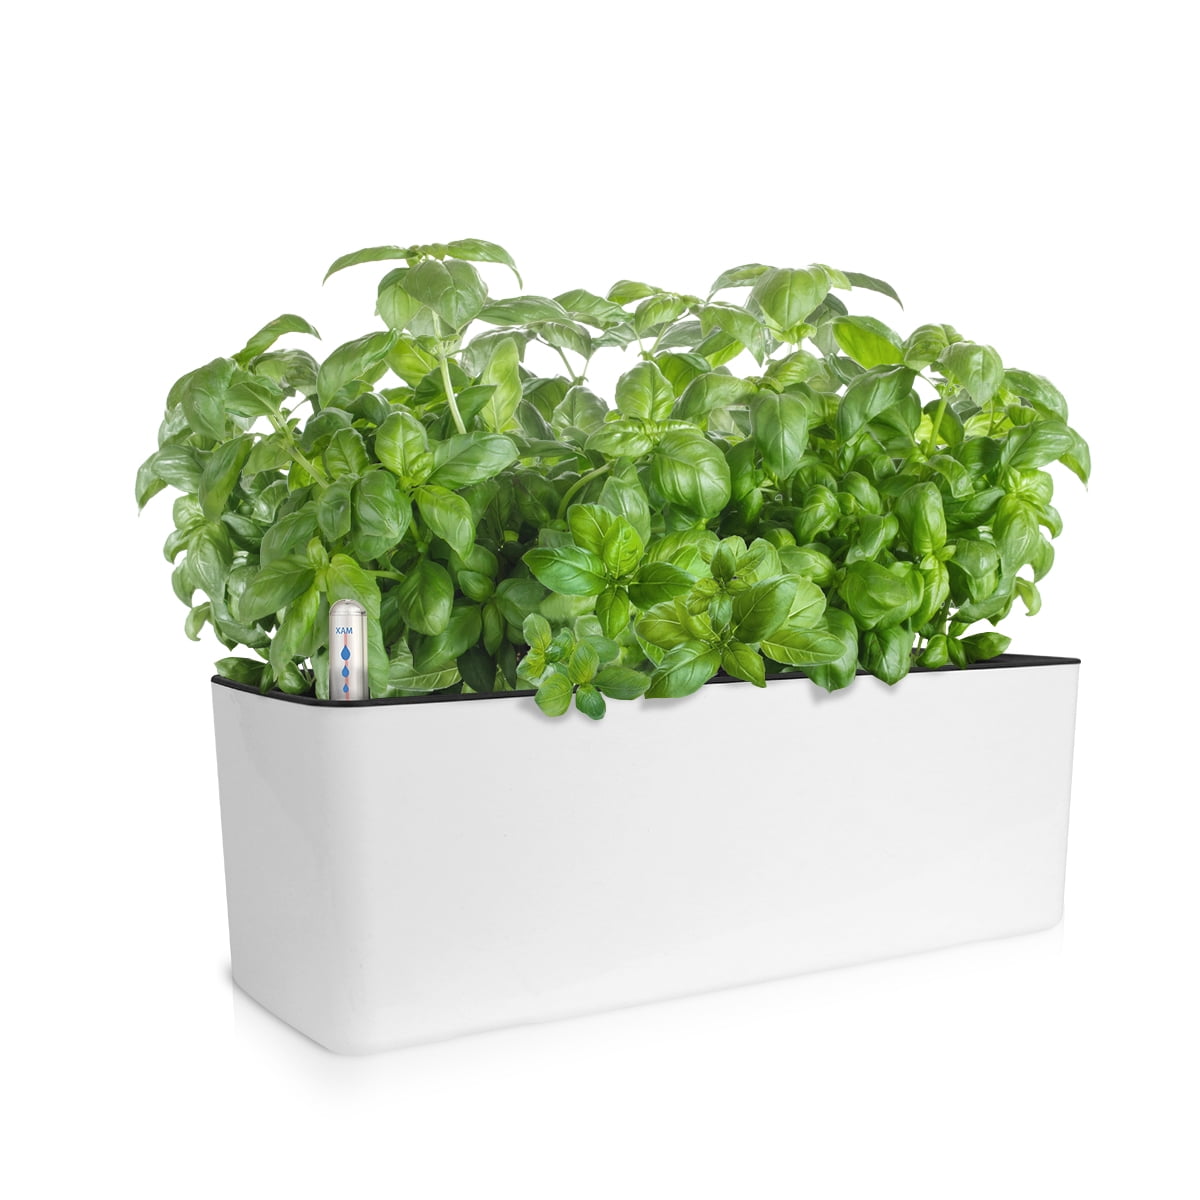 GrowLED Rectangle Self Watering Box Planter for Indoor Plants, White(15.8"x5.2"x5.2") - Walmart.com